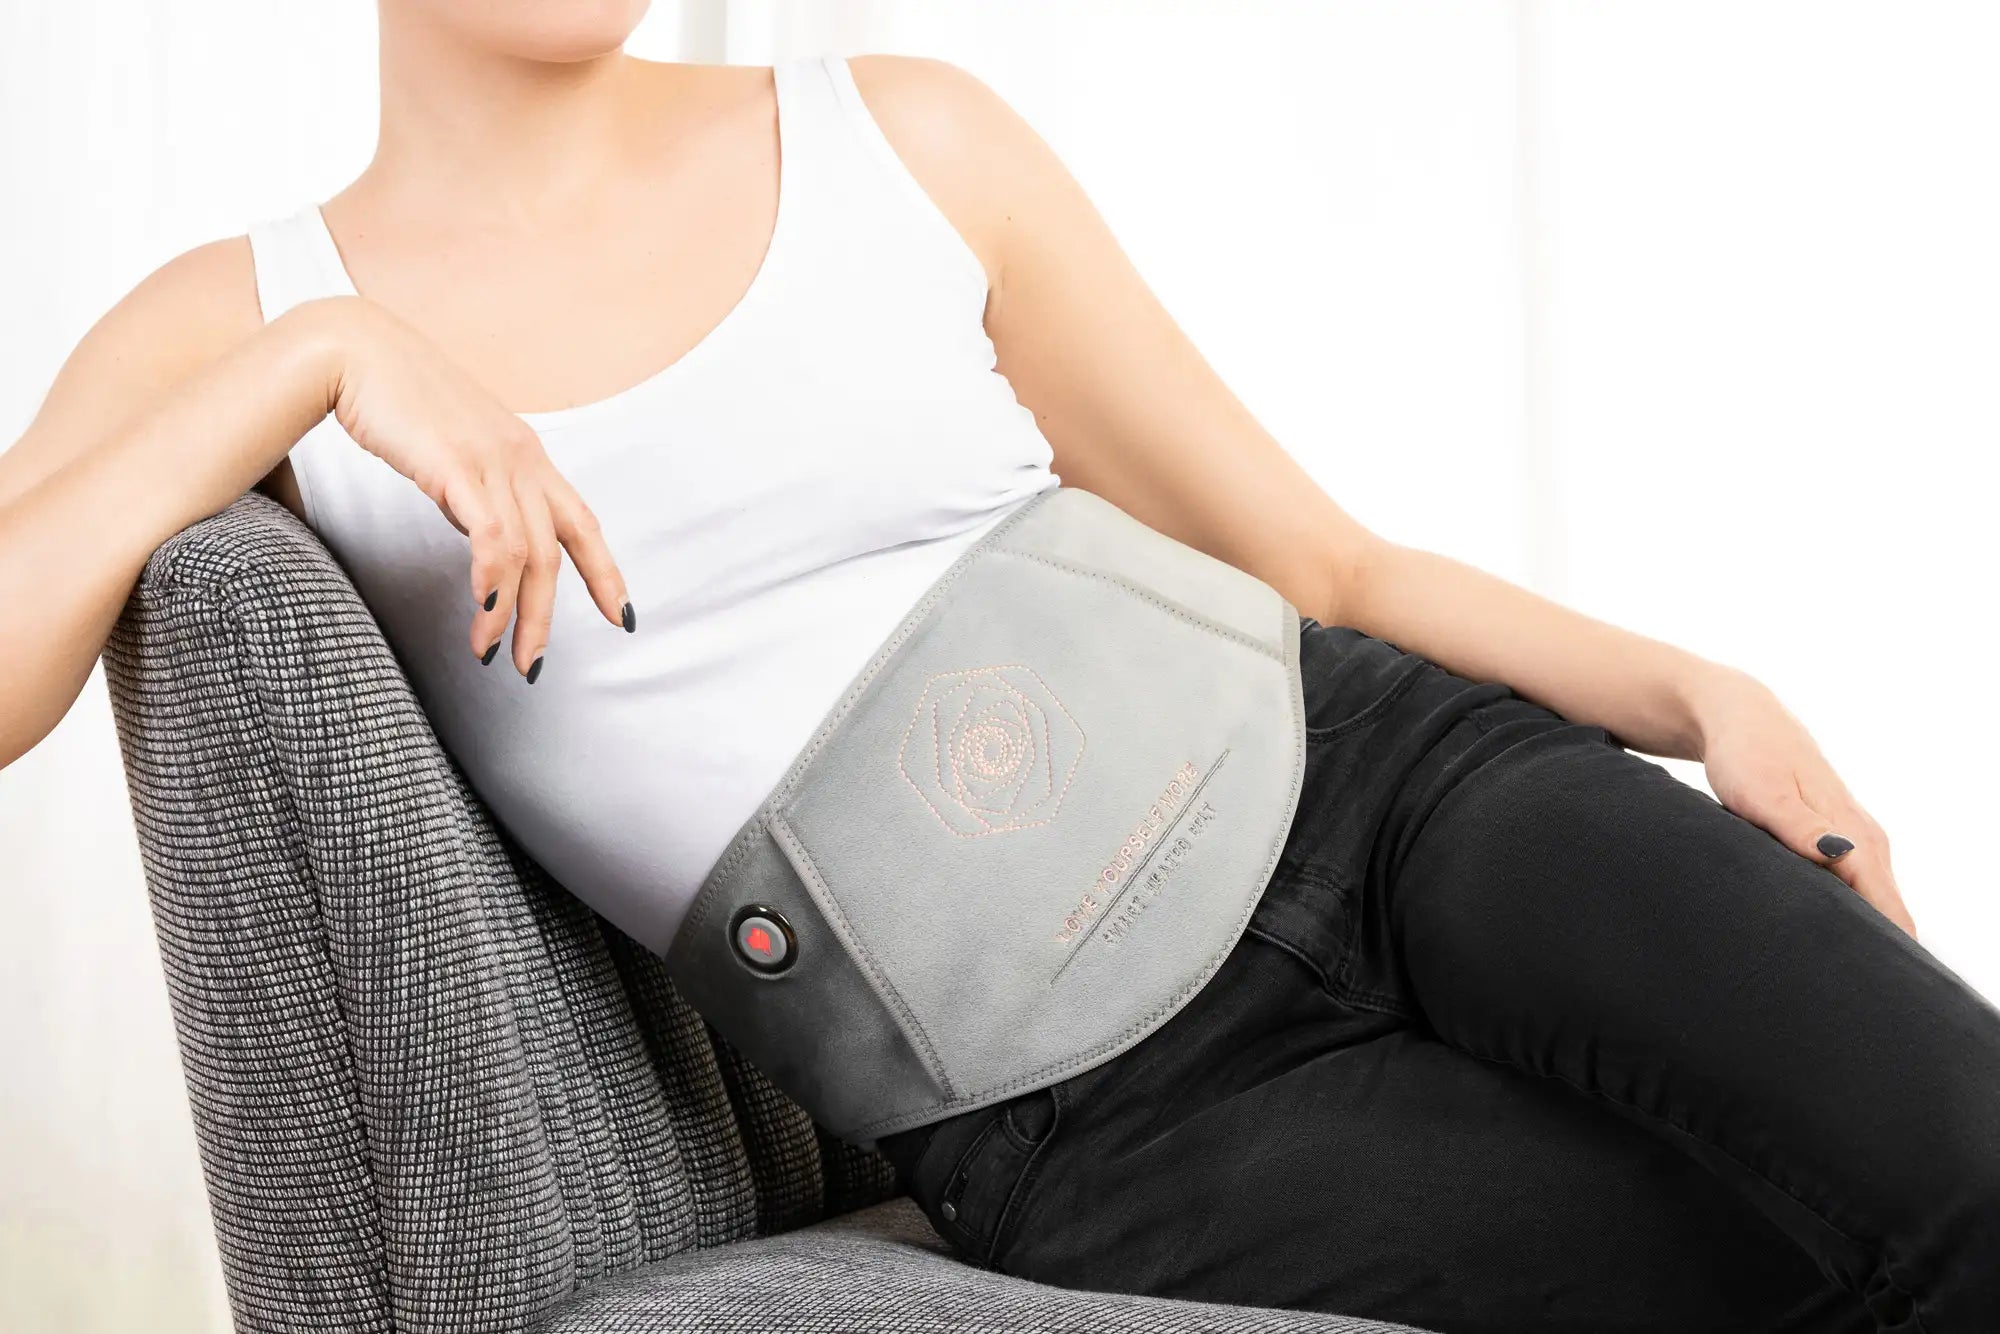 Finding Relief with Heated Belts for Irritable Bowel Syndrome (IBS)